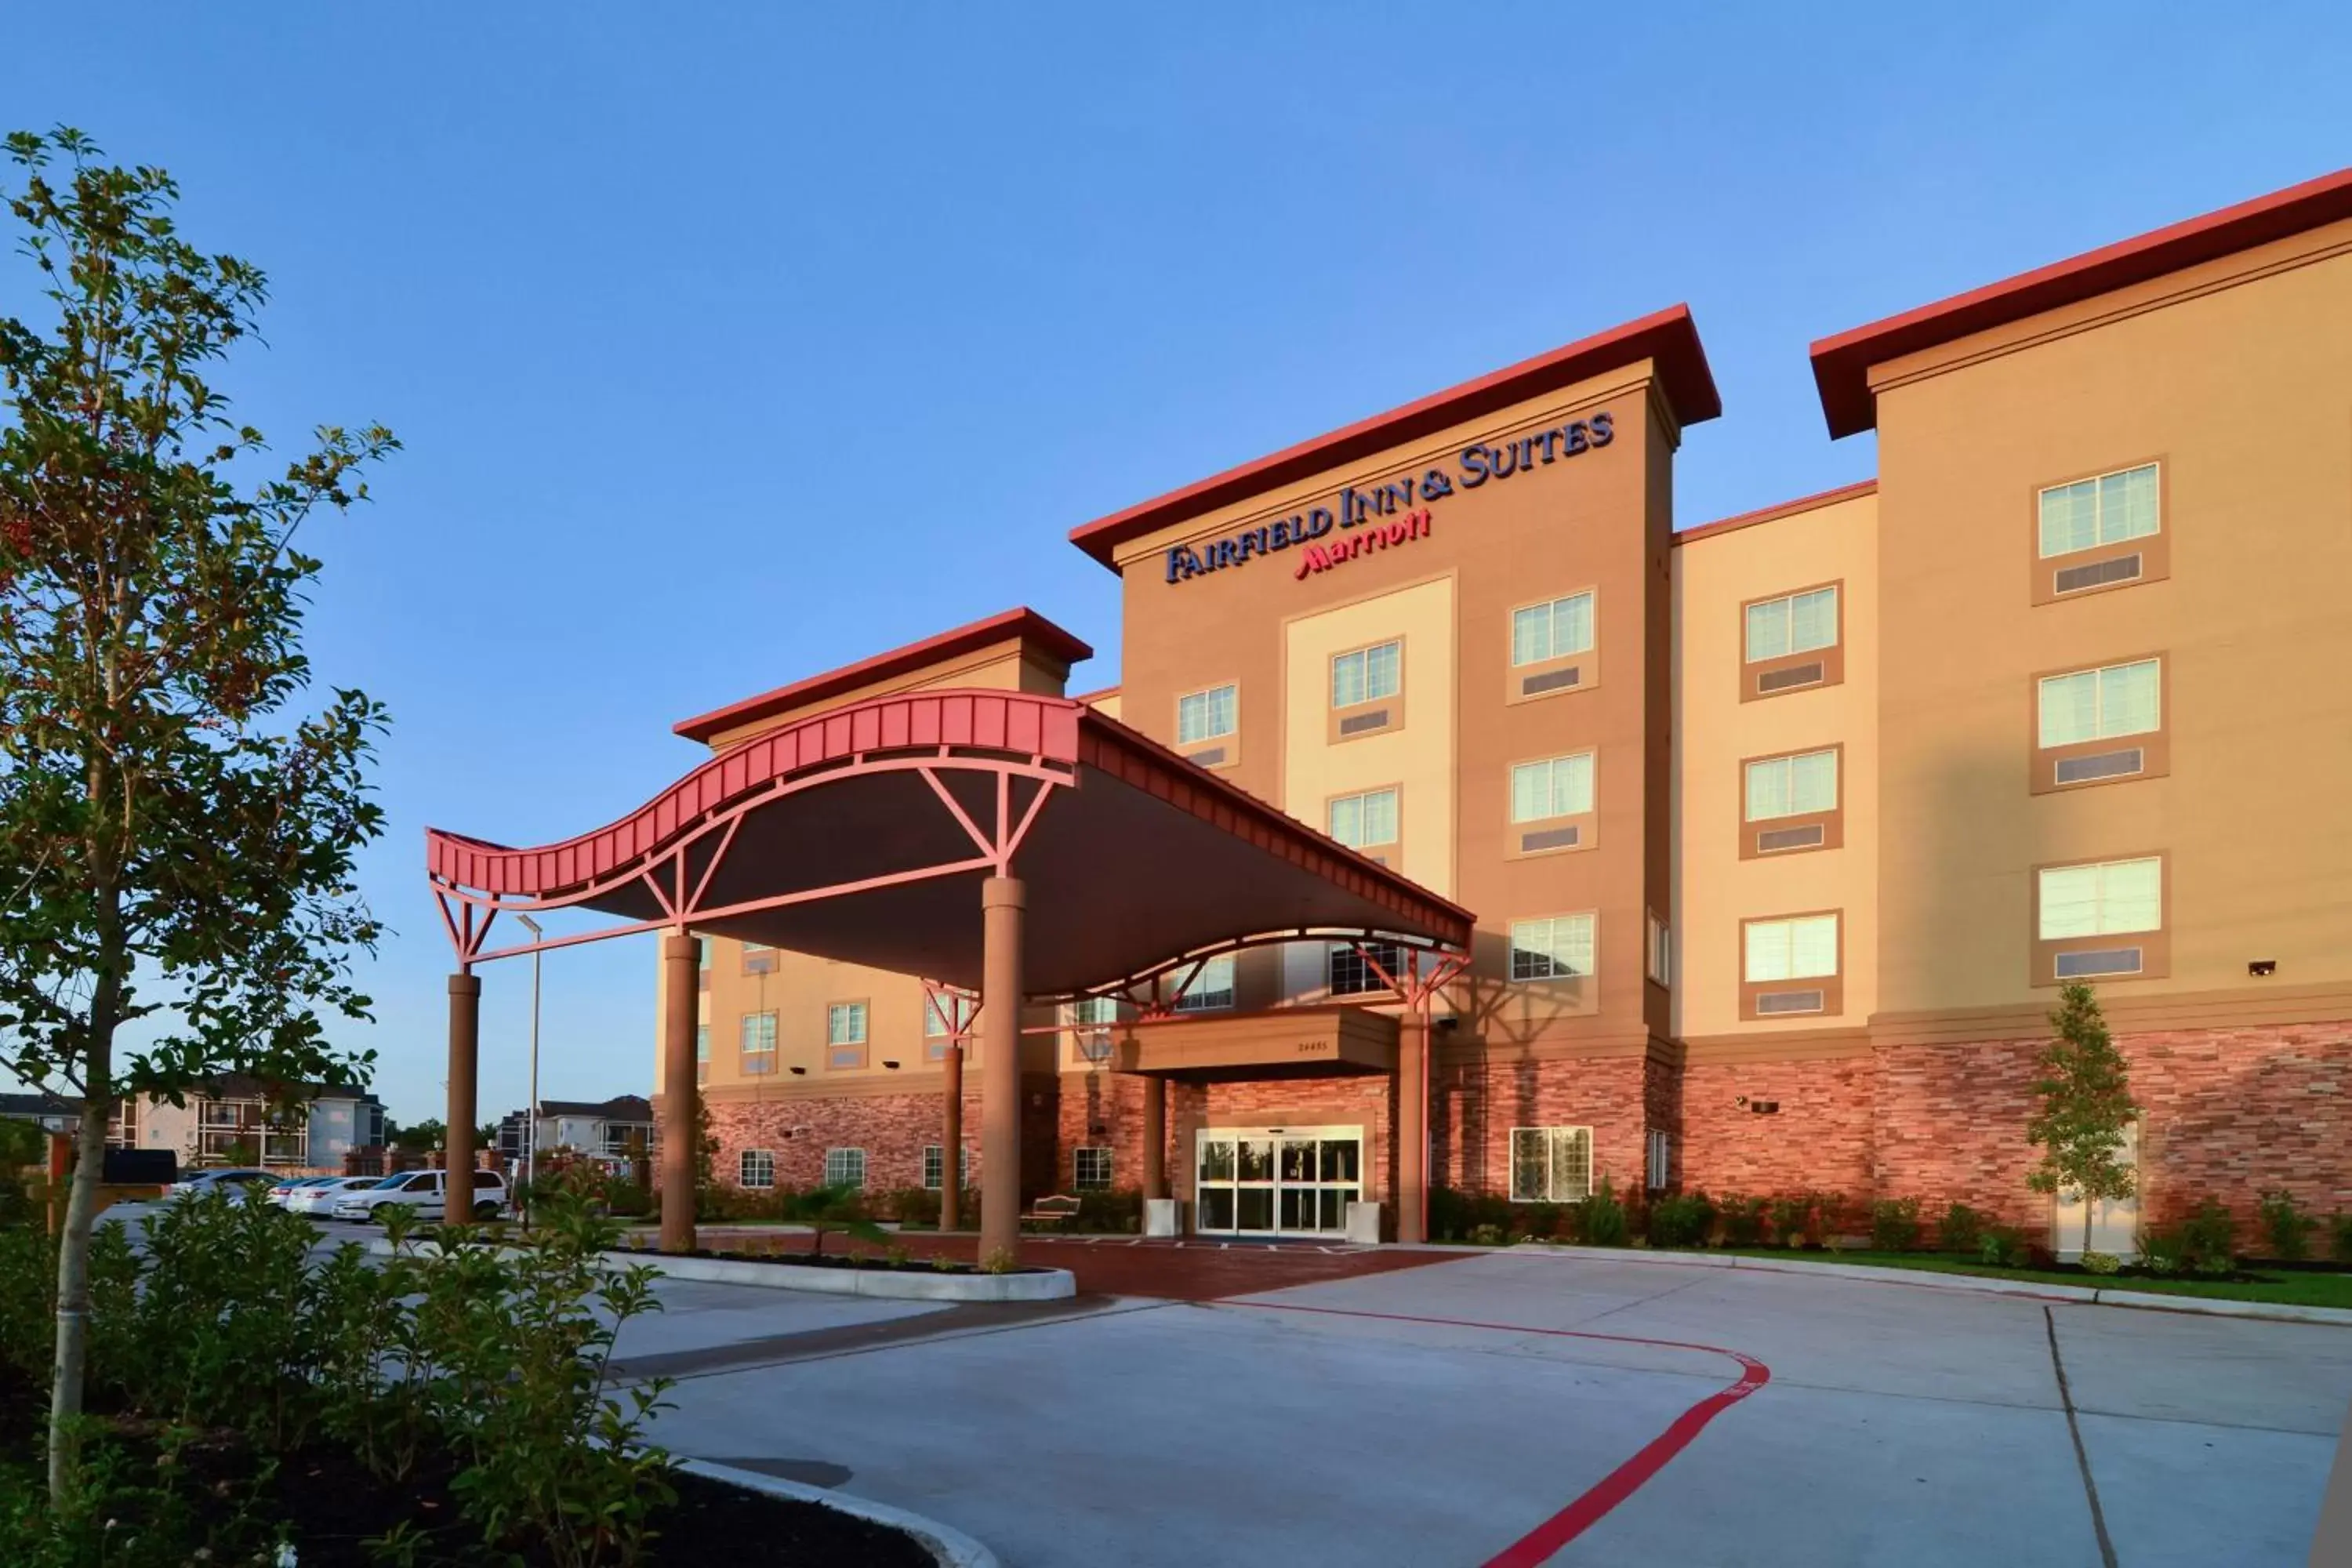 Property Building in Fairfield Inn and Suites by Marriott North Spring